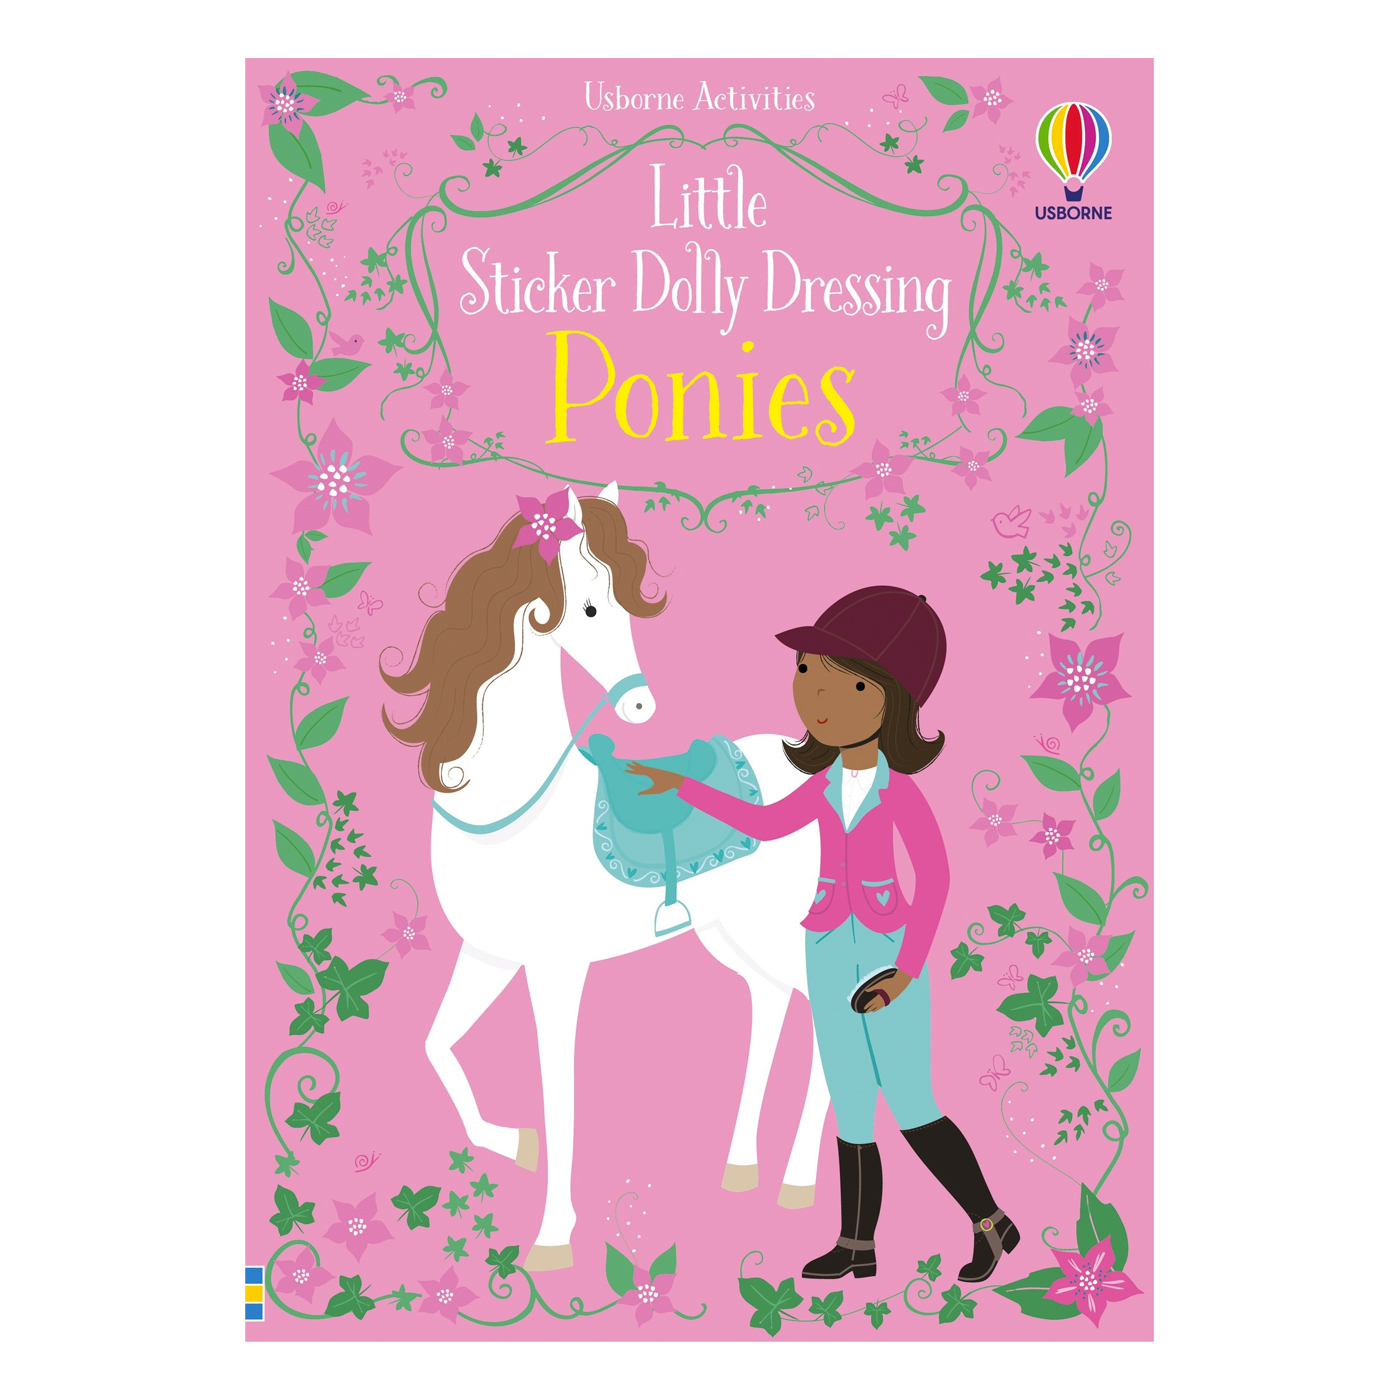  Little Sticker Dolly Dressing Ponies